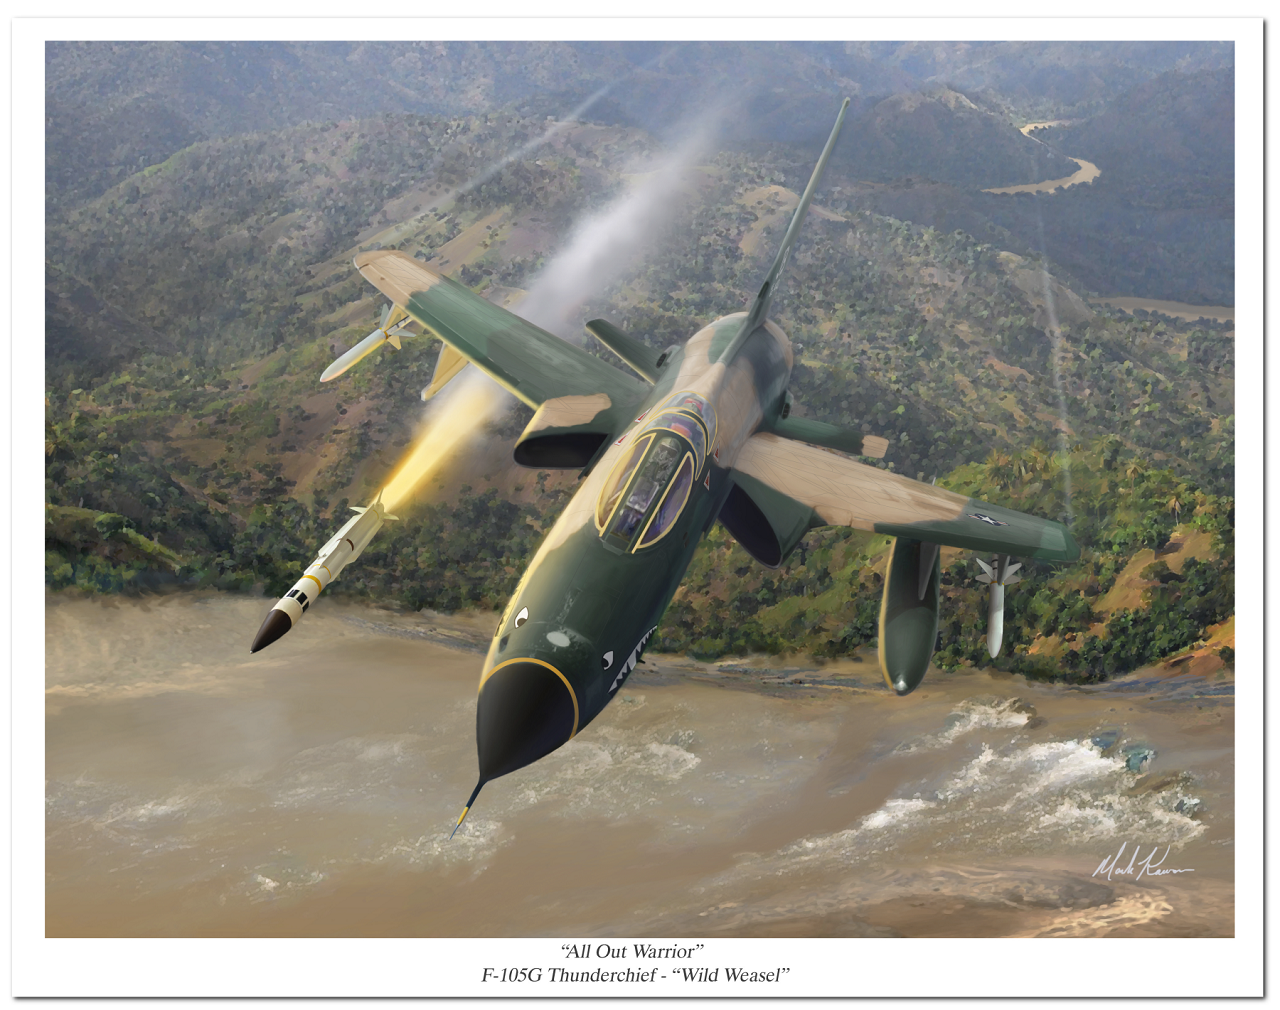 "All Out Warrior" by Mark Karvon featuring the USAF F-105G Thunderchief Wild Weasel